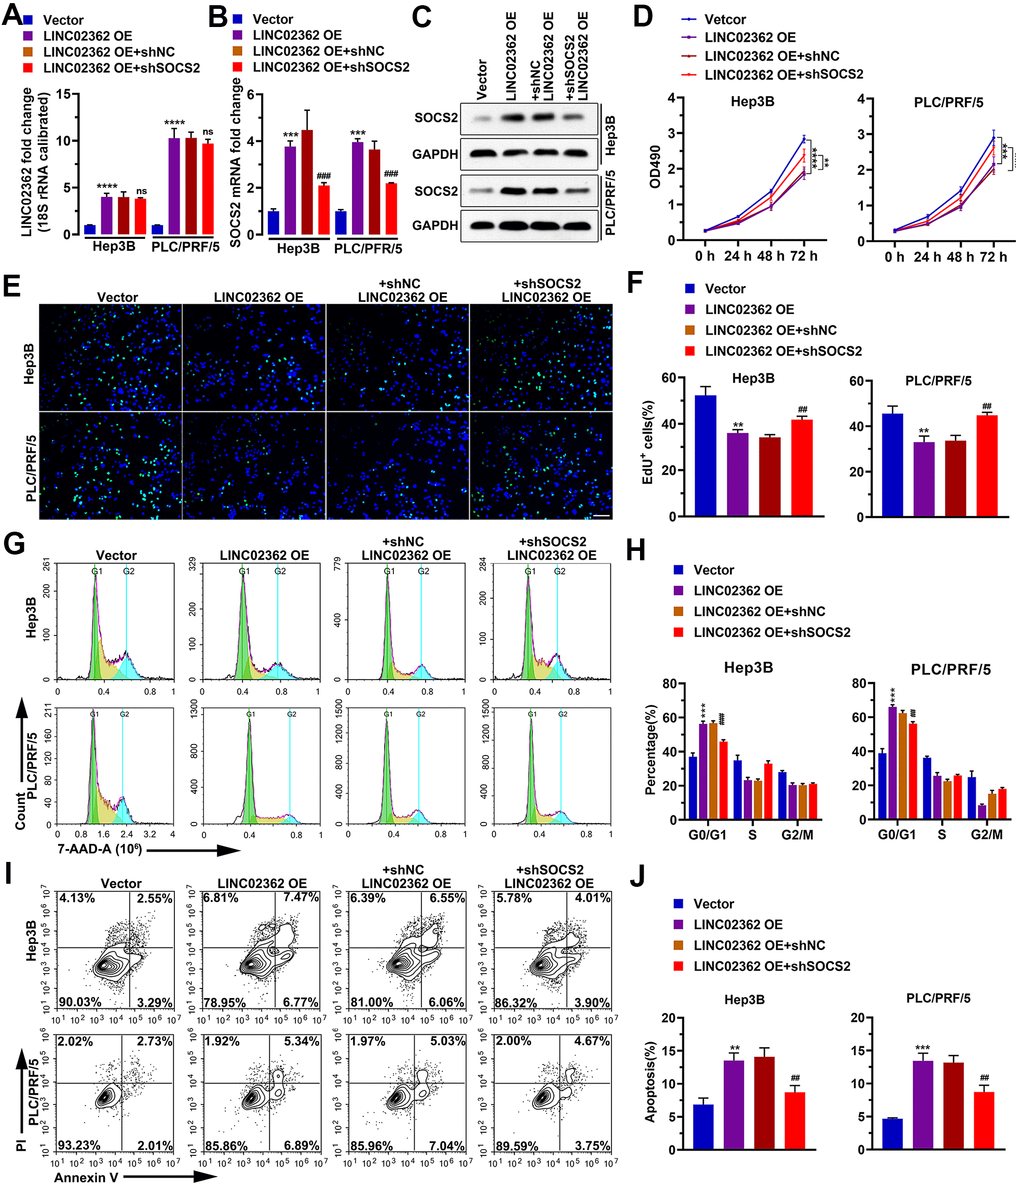 SOCS2 mediates the inhibitory effects of LINC02362 on HCC cell survival. (A, B) RT-qPCR quantification (n=3) of LINC02362 (A) and SOCS2 (B) expression in Hep3B and PLC/PRF/5 cells. (C) Quantification of SOCS2 levels by western blotting (n=3) with LINC02362 and SOCS2 misexpression. (D) MTT assay (n=3) for measuring the proliferative abilities of HCC cells with LINC02362 and SOCS2 misexpression. (E, F) EdU labeling to detect the percentage of dividing cells in LINC02362 and SOCS2 misexpressing HCC cells (E) and the corresponding quantification (F; n=3). Bar=100μm. (G, H) Measurement (G) and quantification (H; n=3) of the cell cycle in HCC cells by flow cytometry. (I, J) Detection (I) and quantification (J; n=3) of apoptotic cells in HCC cells misexpressing LINC02362 and SOCS2. # 0.01 P P P P 